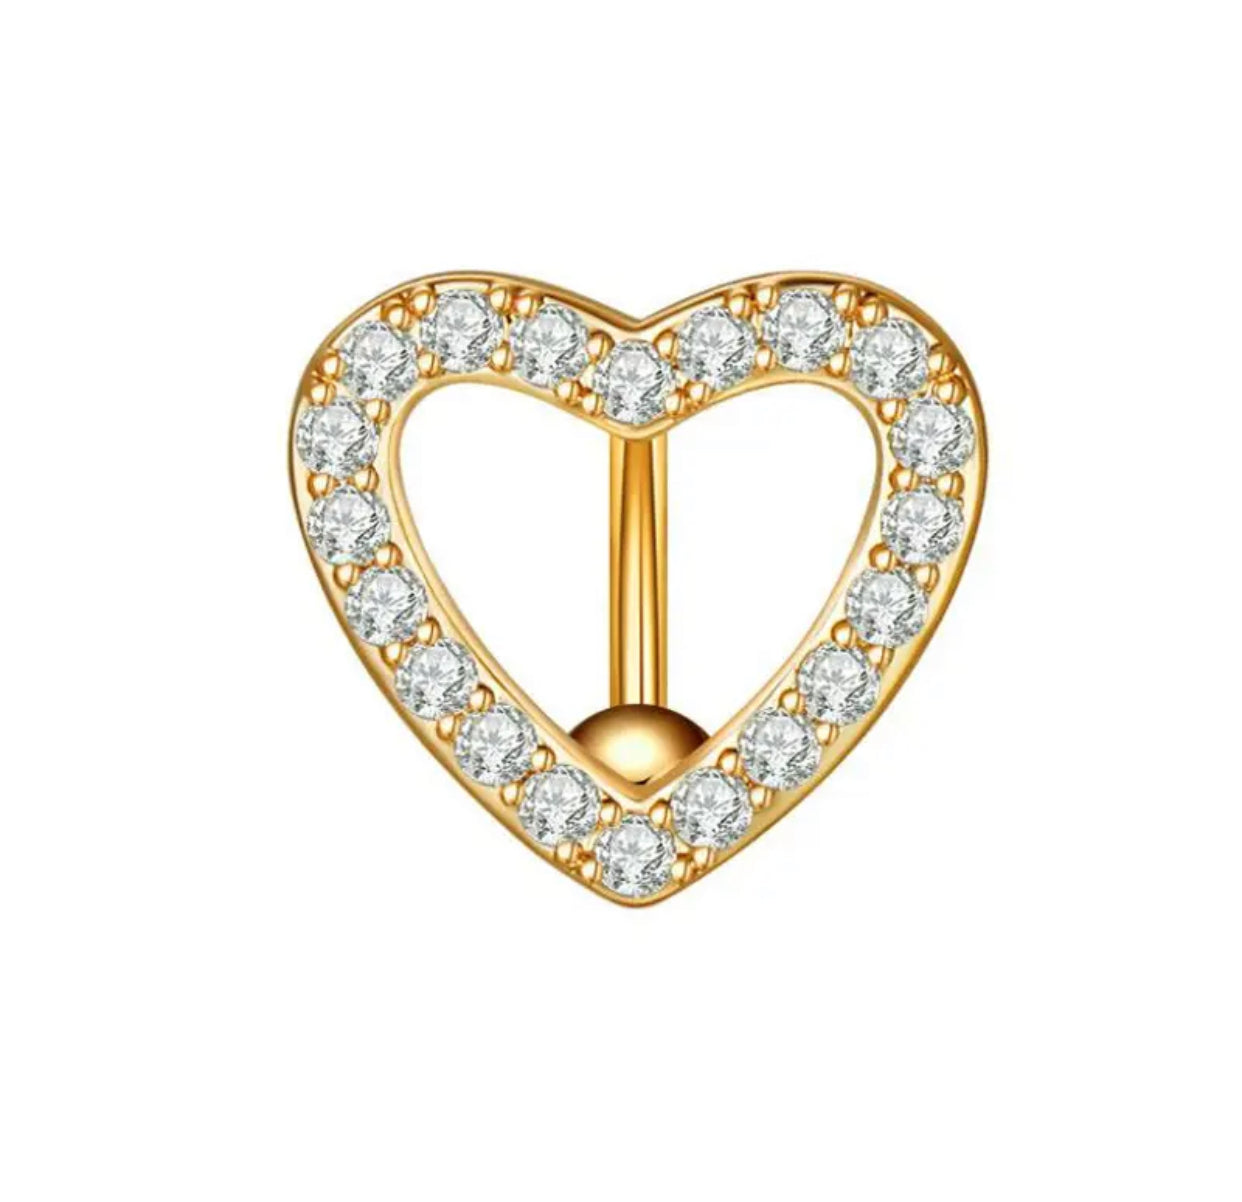 Gold Heart Belly Button Navel Ring Piercing Jewelry Top Mount Non-Dangle White Background Image